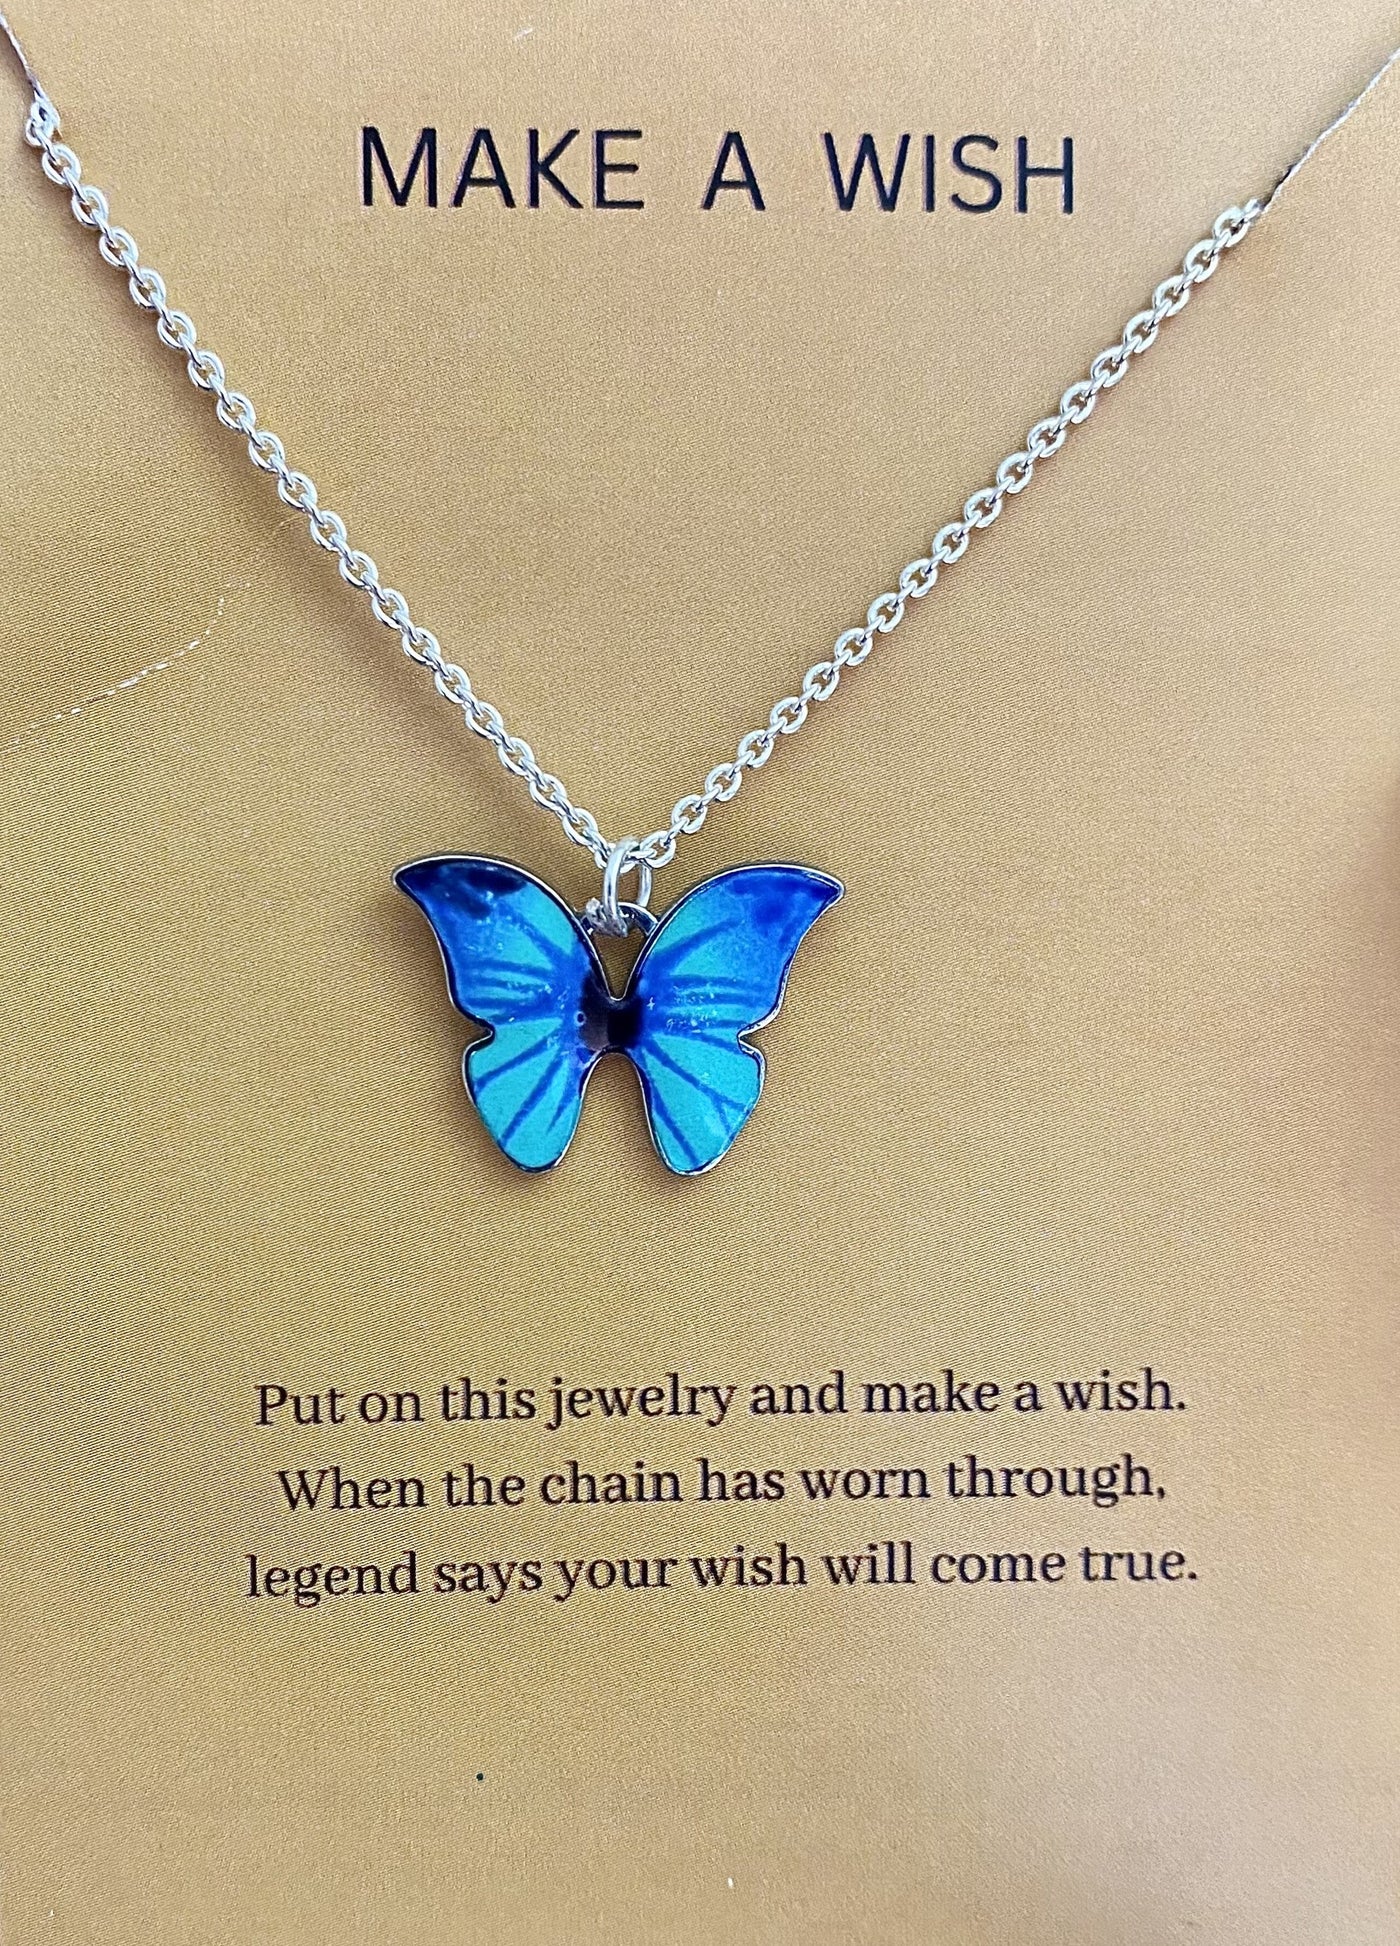 Waterproof Blue Butterfly Charm Necklace With Stainless Steel Chain